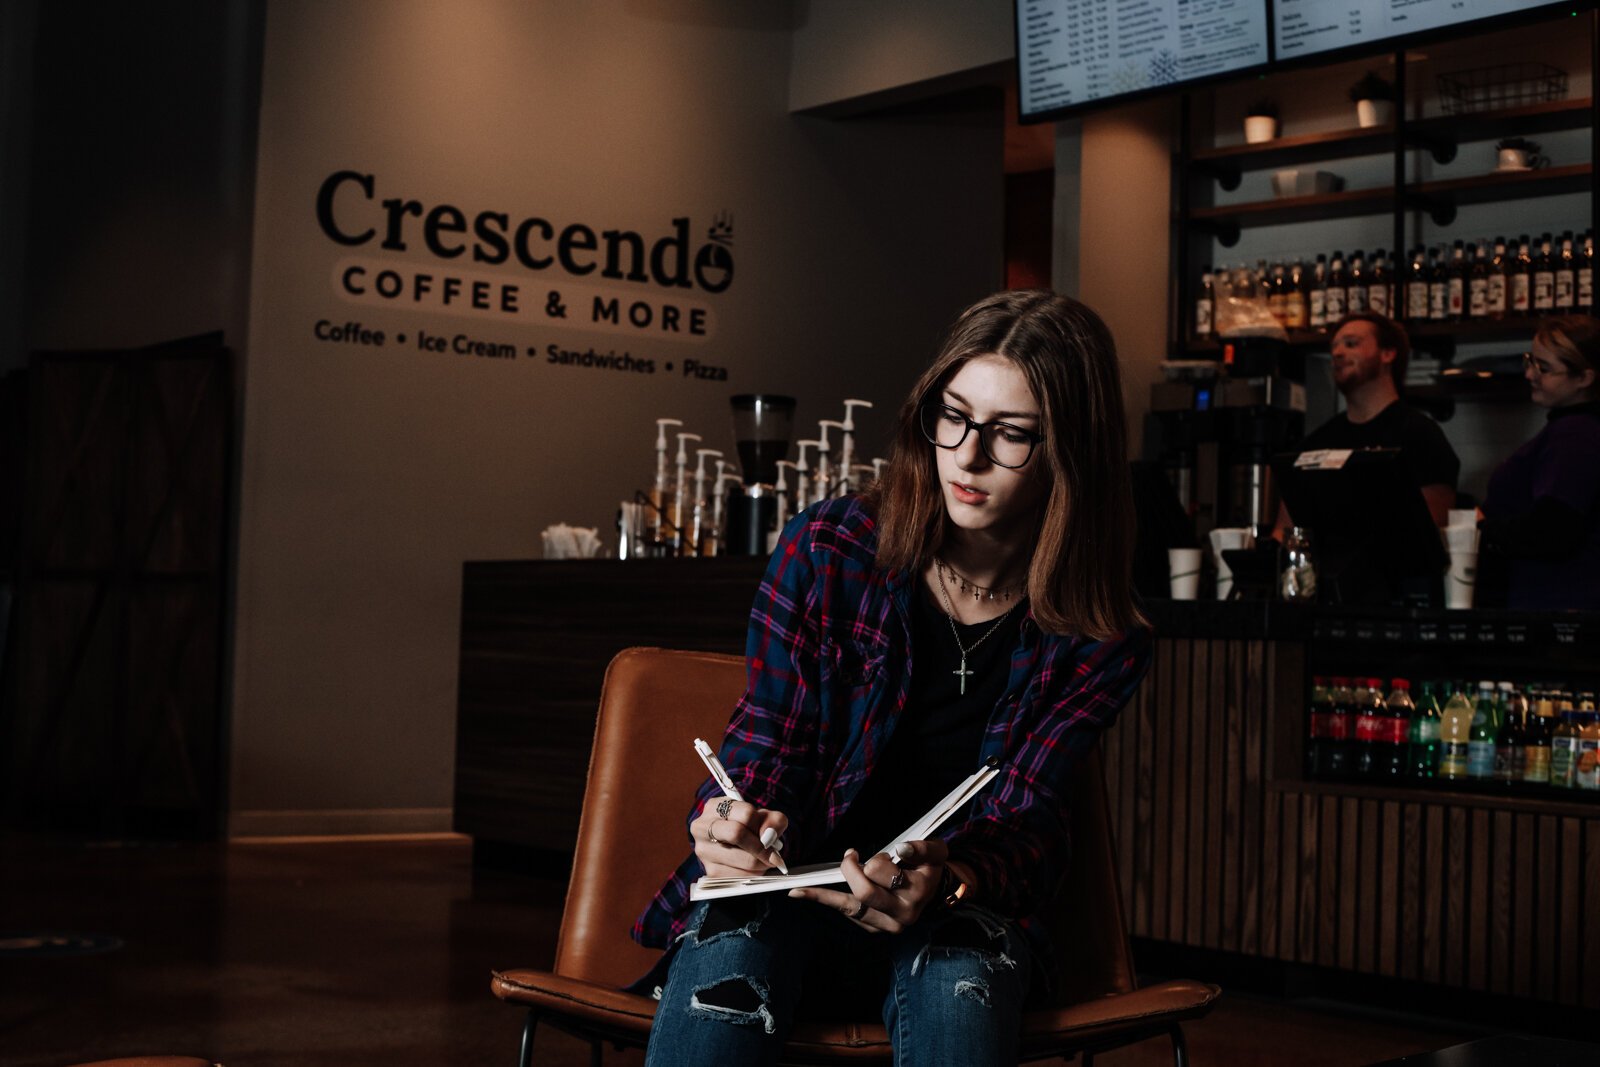 Amara Marion, an eighth grader at Memorial Park, writes songs for piano while at Crescendo Coffee & More.